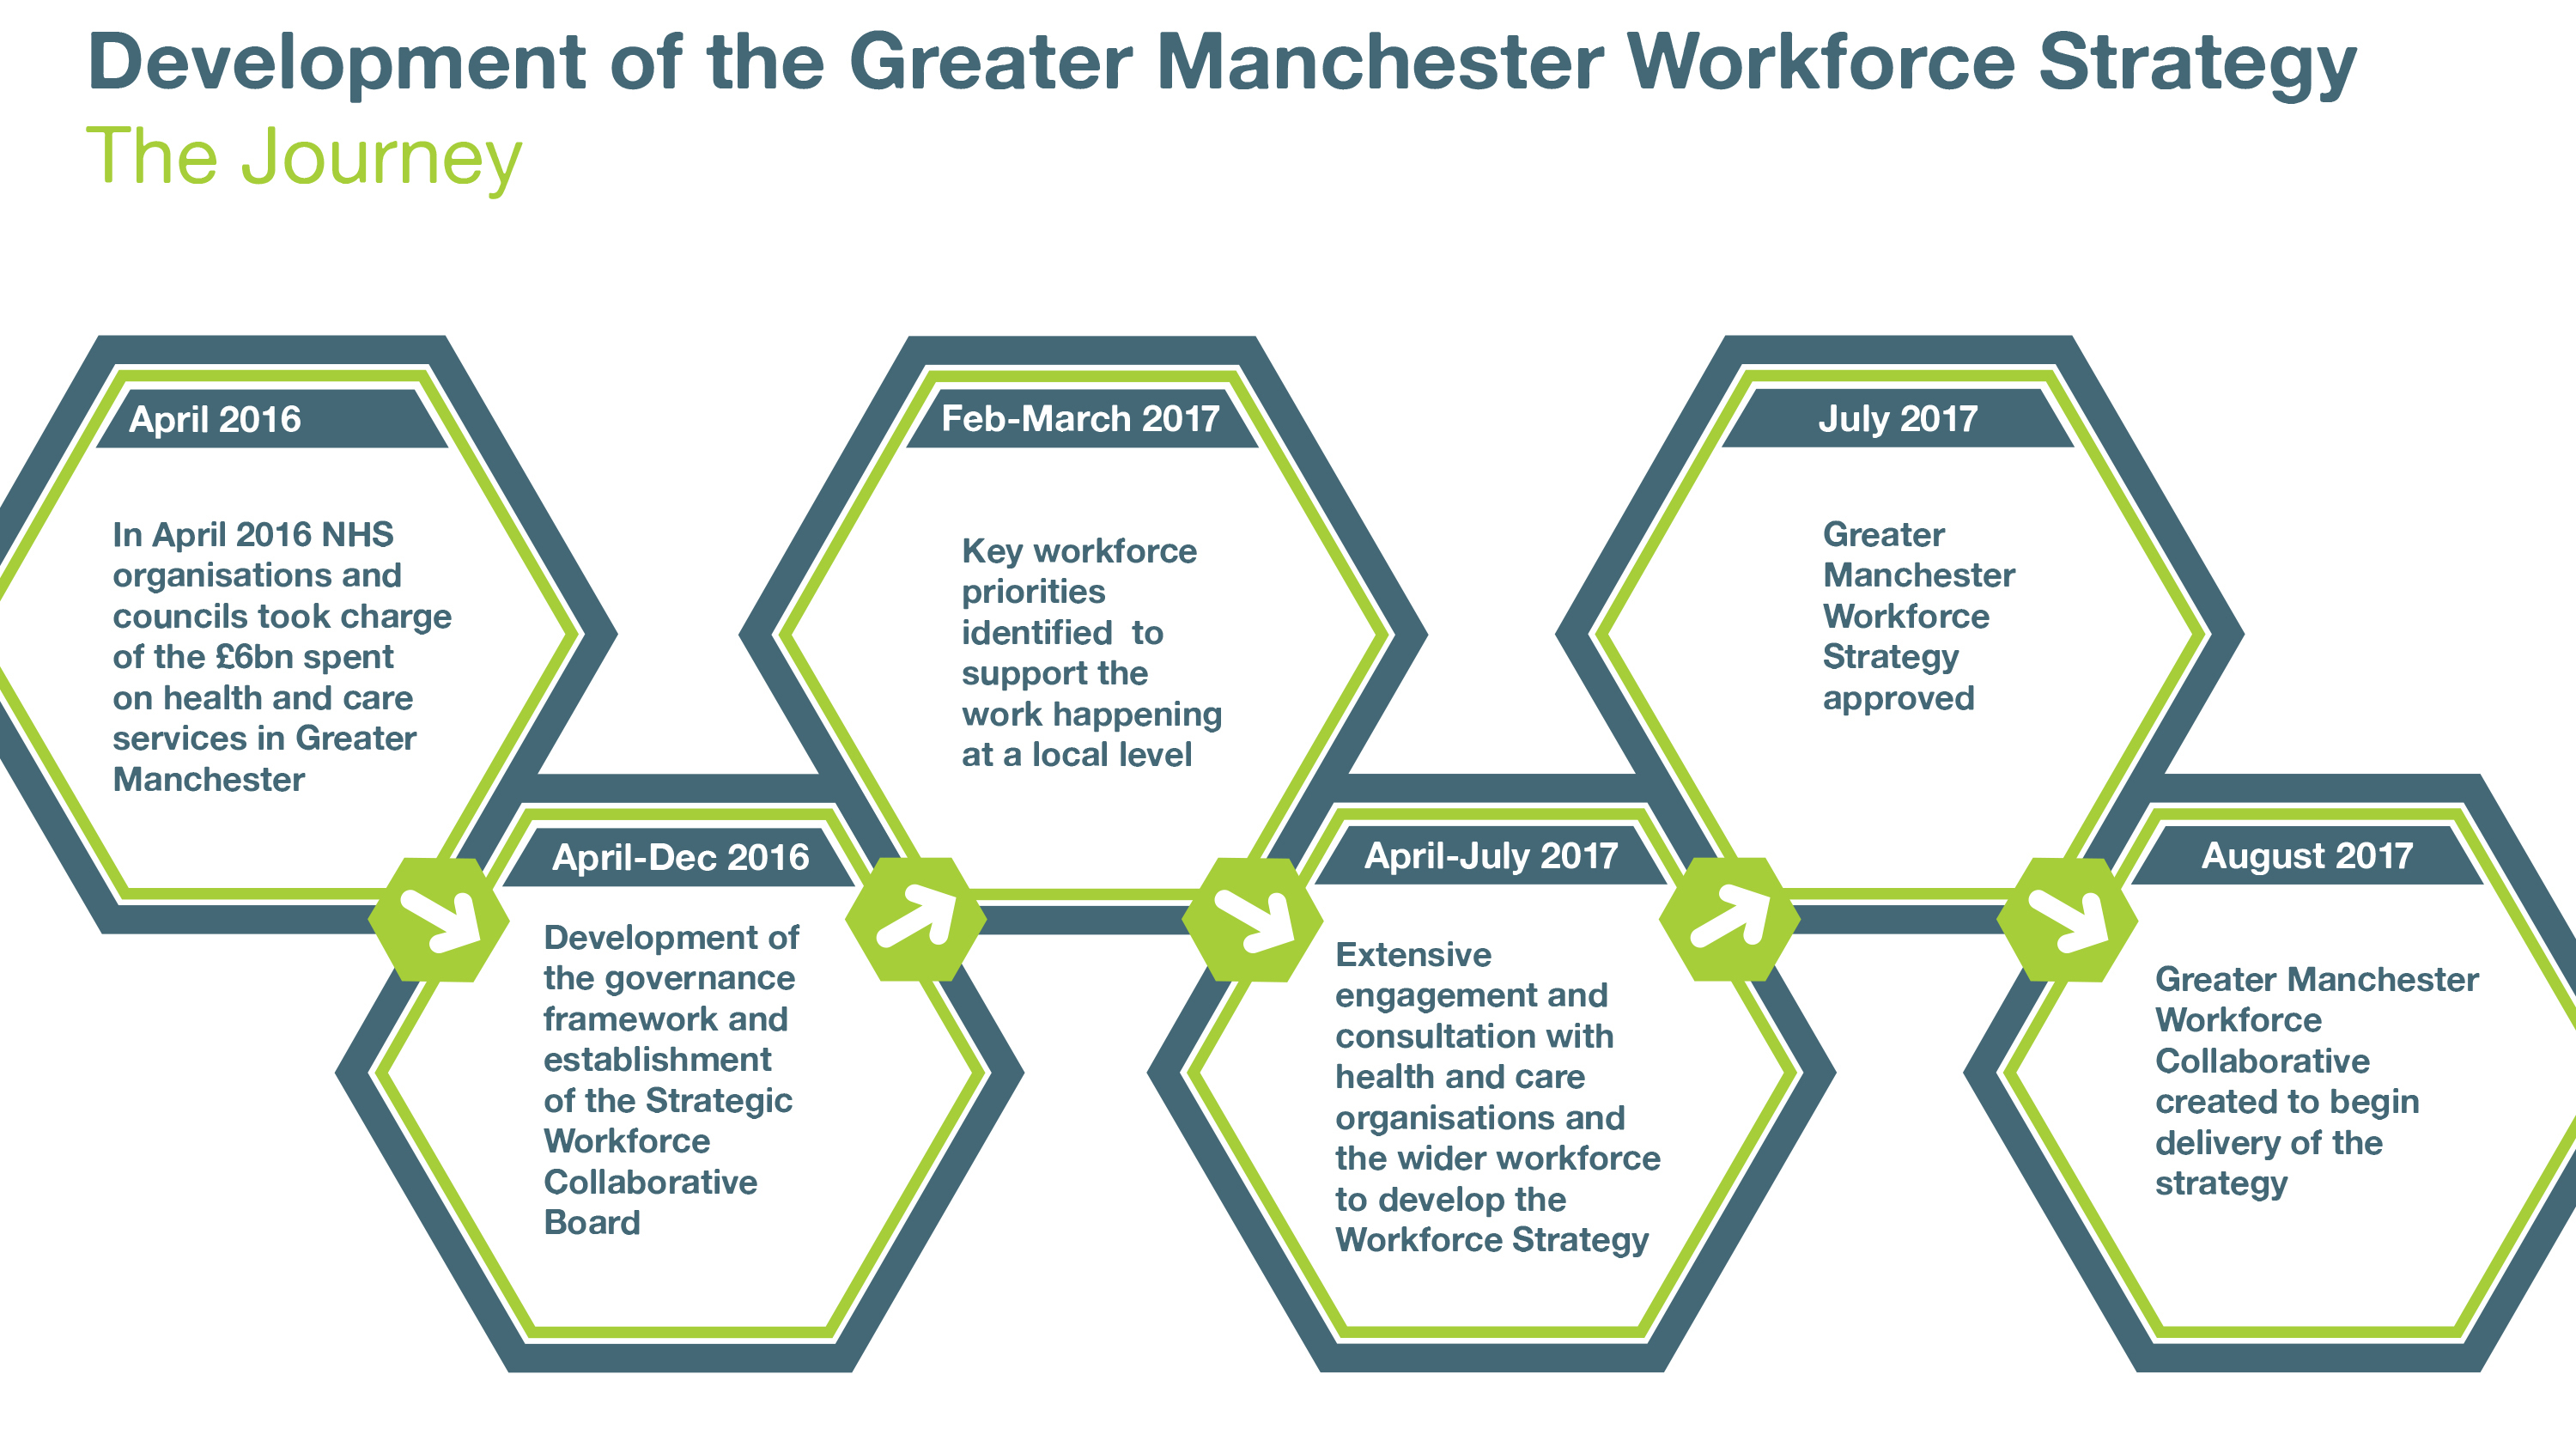 Development of the Greater Manchester Workforce Strategy - The Journey